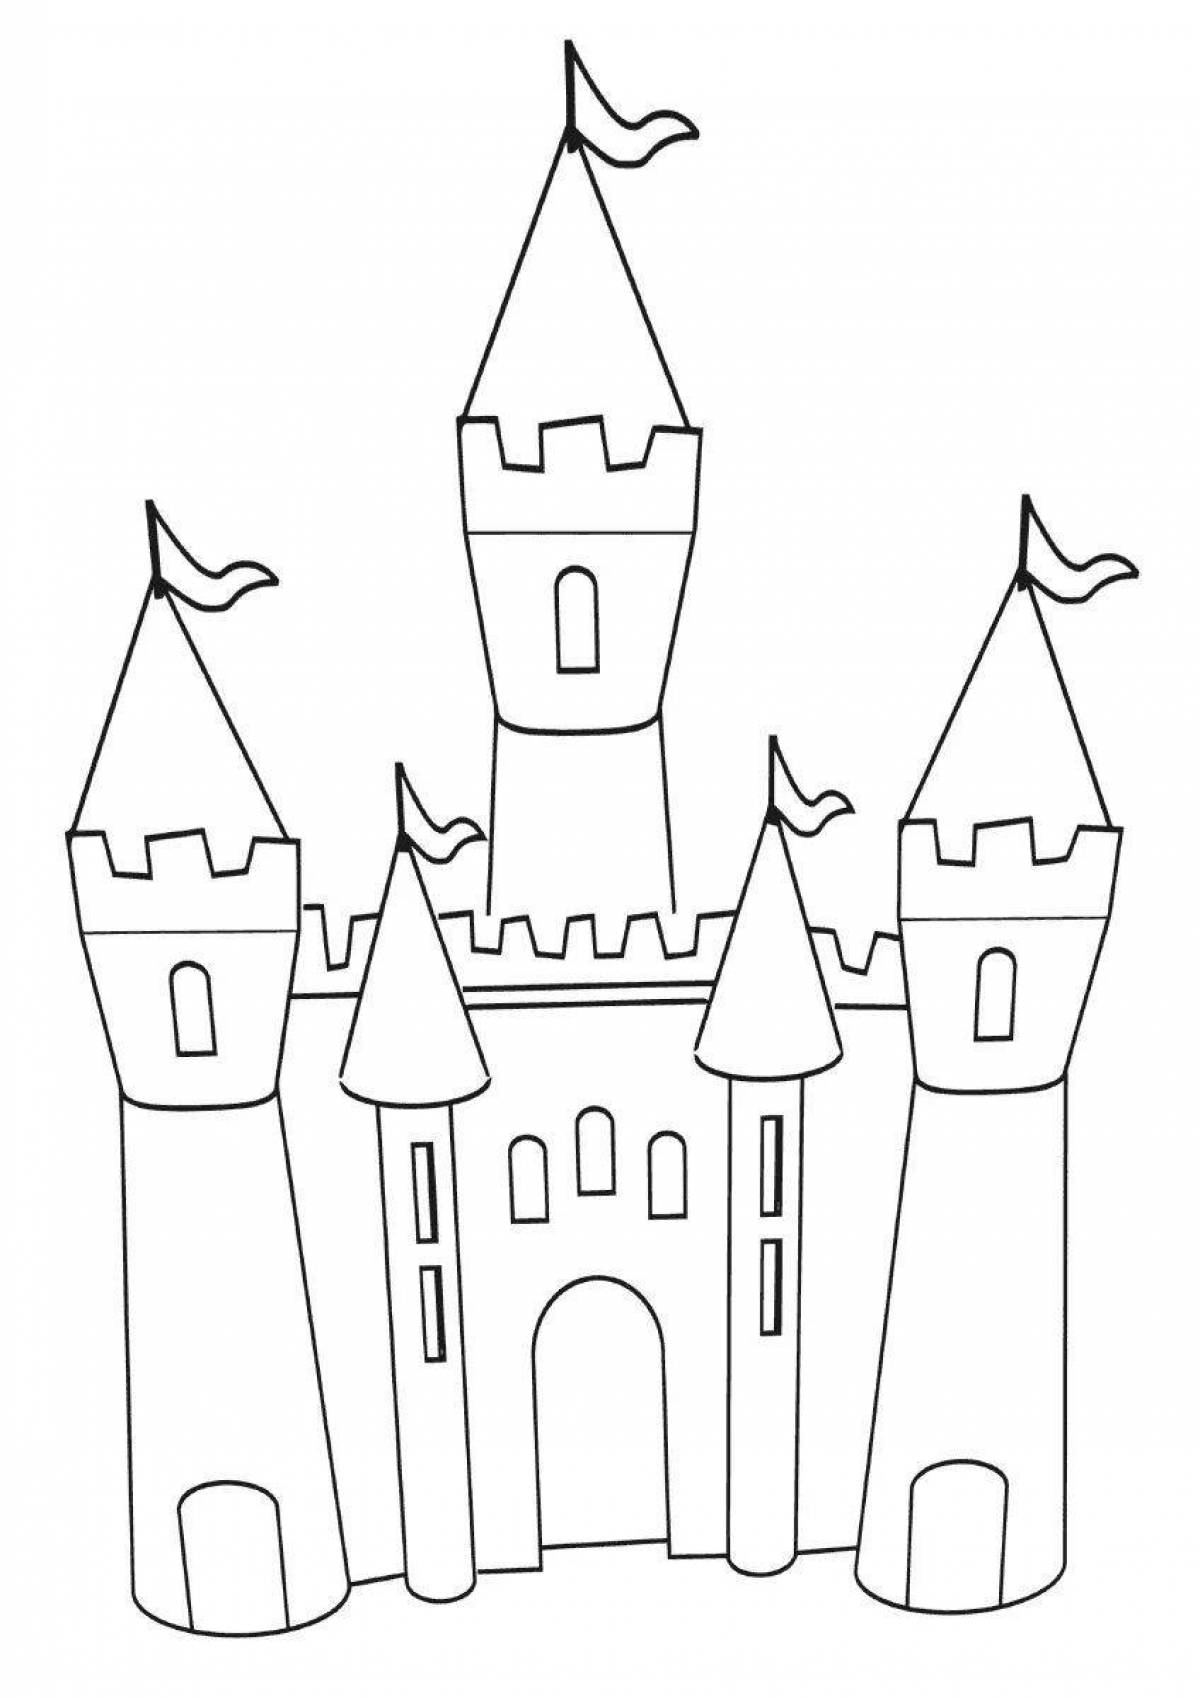 Coloring of the palace of the snow queen